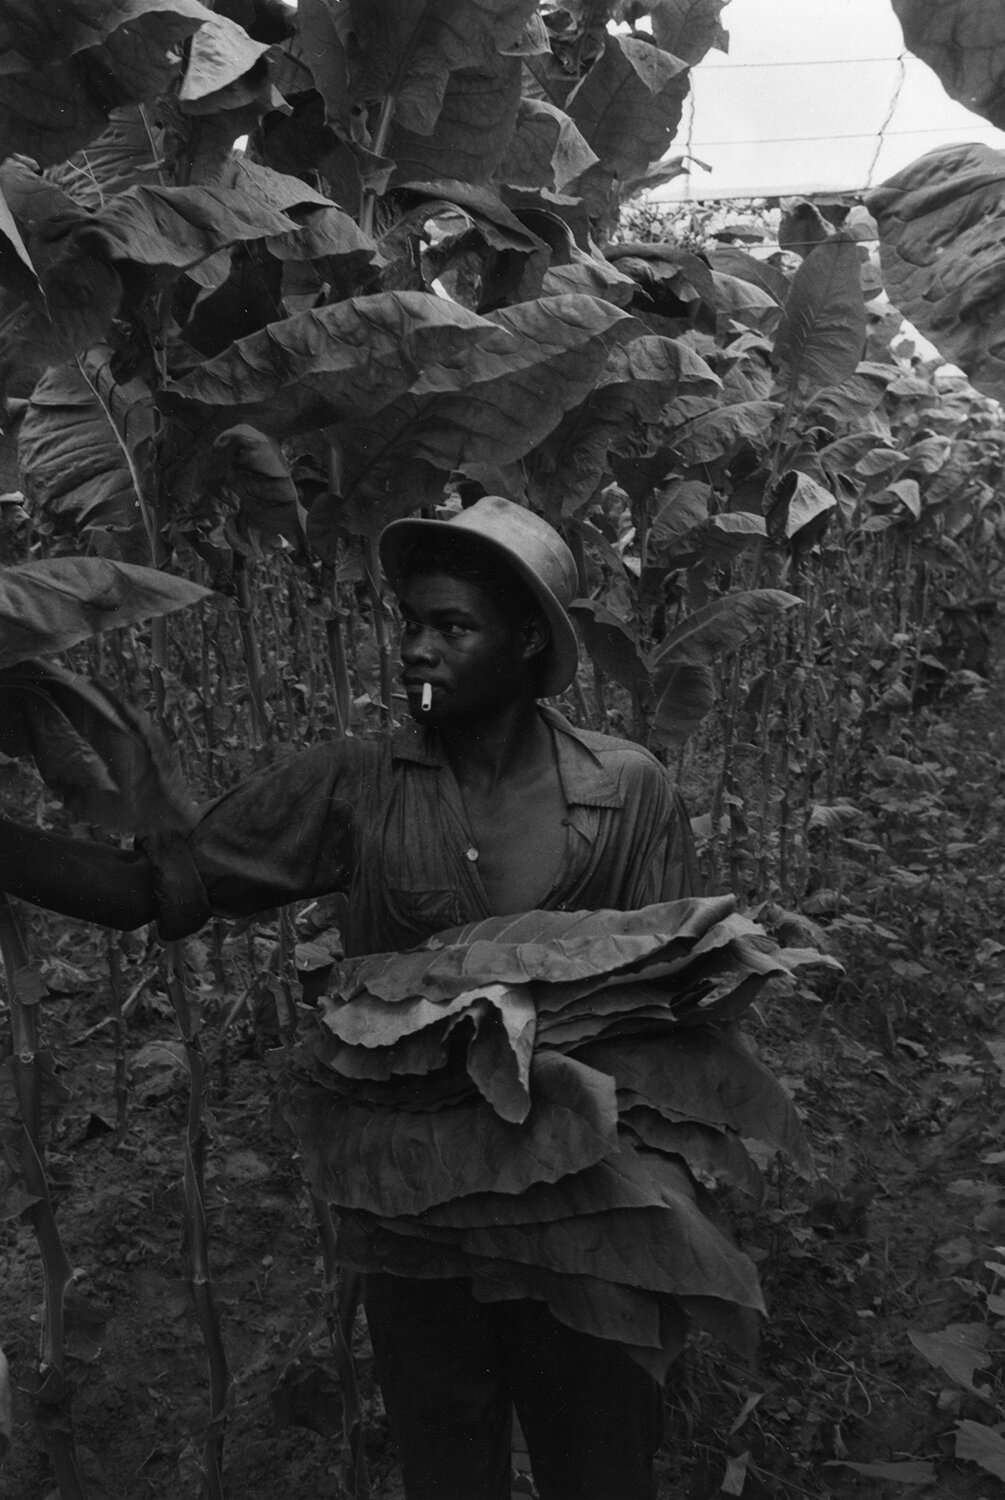   Picking Leaves , 1966 Silver Gelatin Print 8 × 5 1/2 in. (image size) The Do Good Fund, Inc., 2017-45 